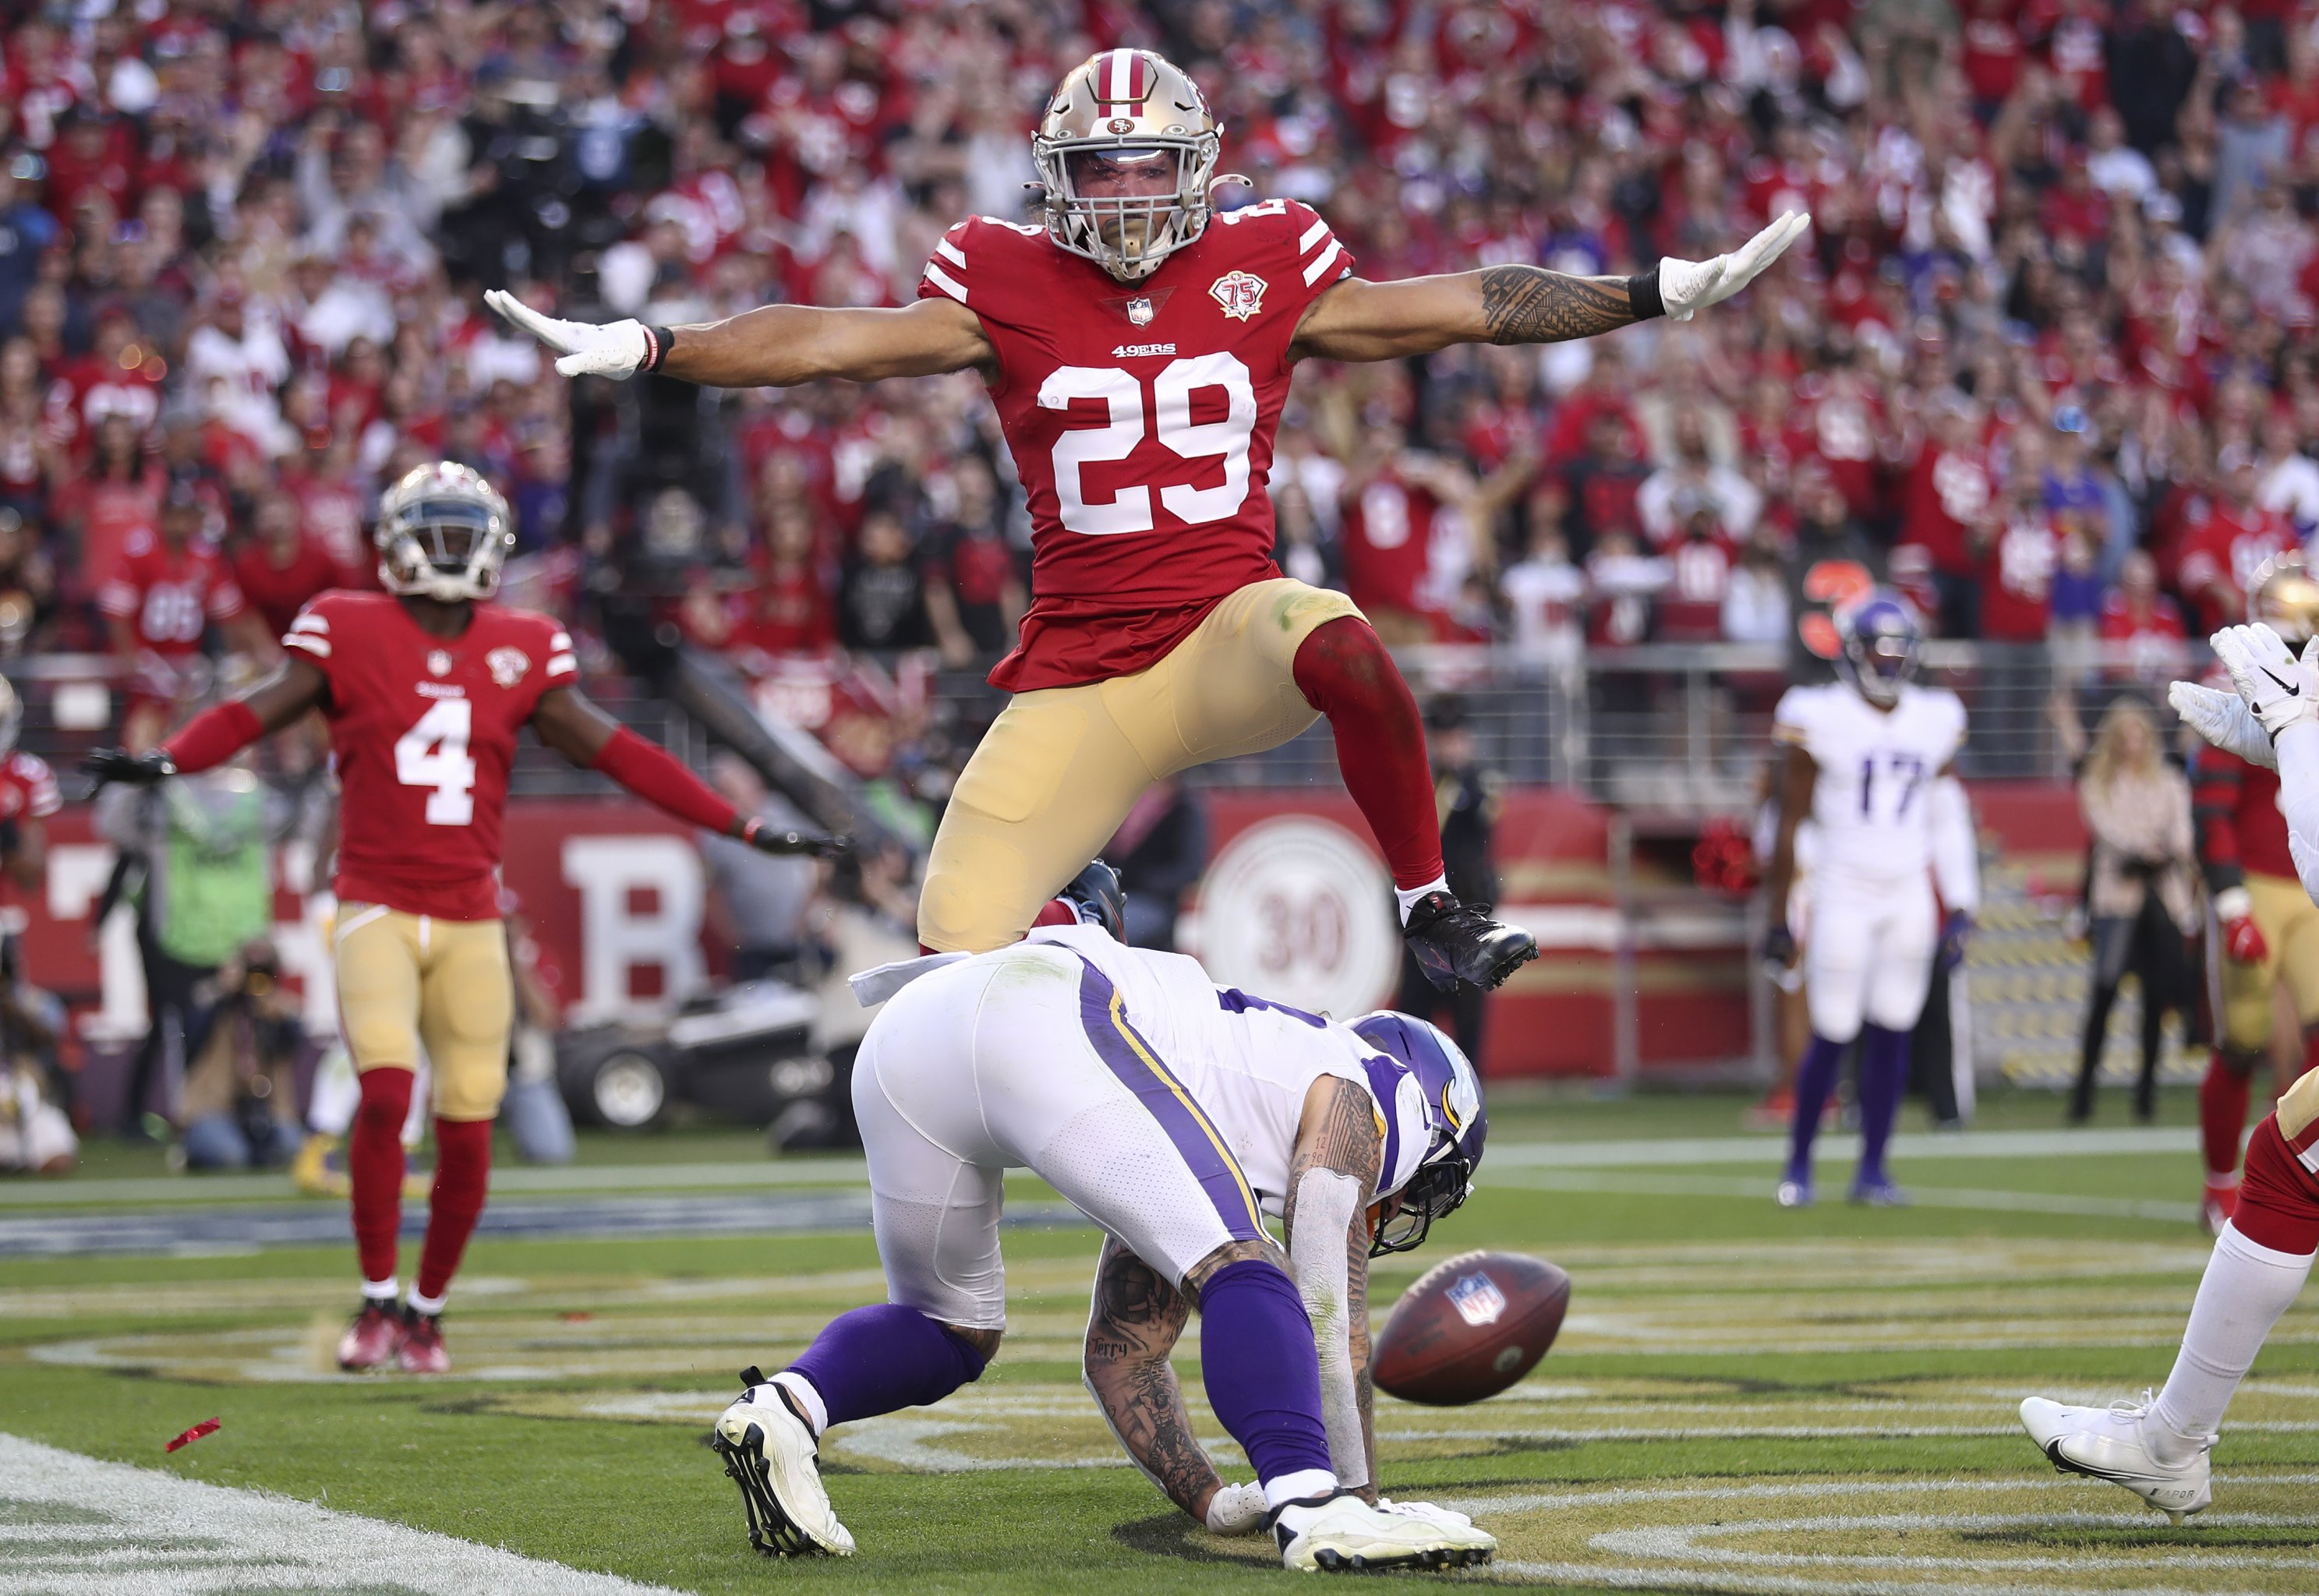 NFL playoffs: Takeaways from 49ers' dominant playoff win vs. Vikings